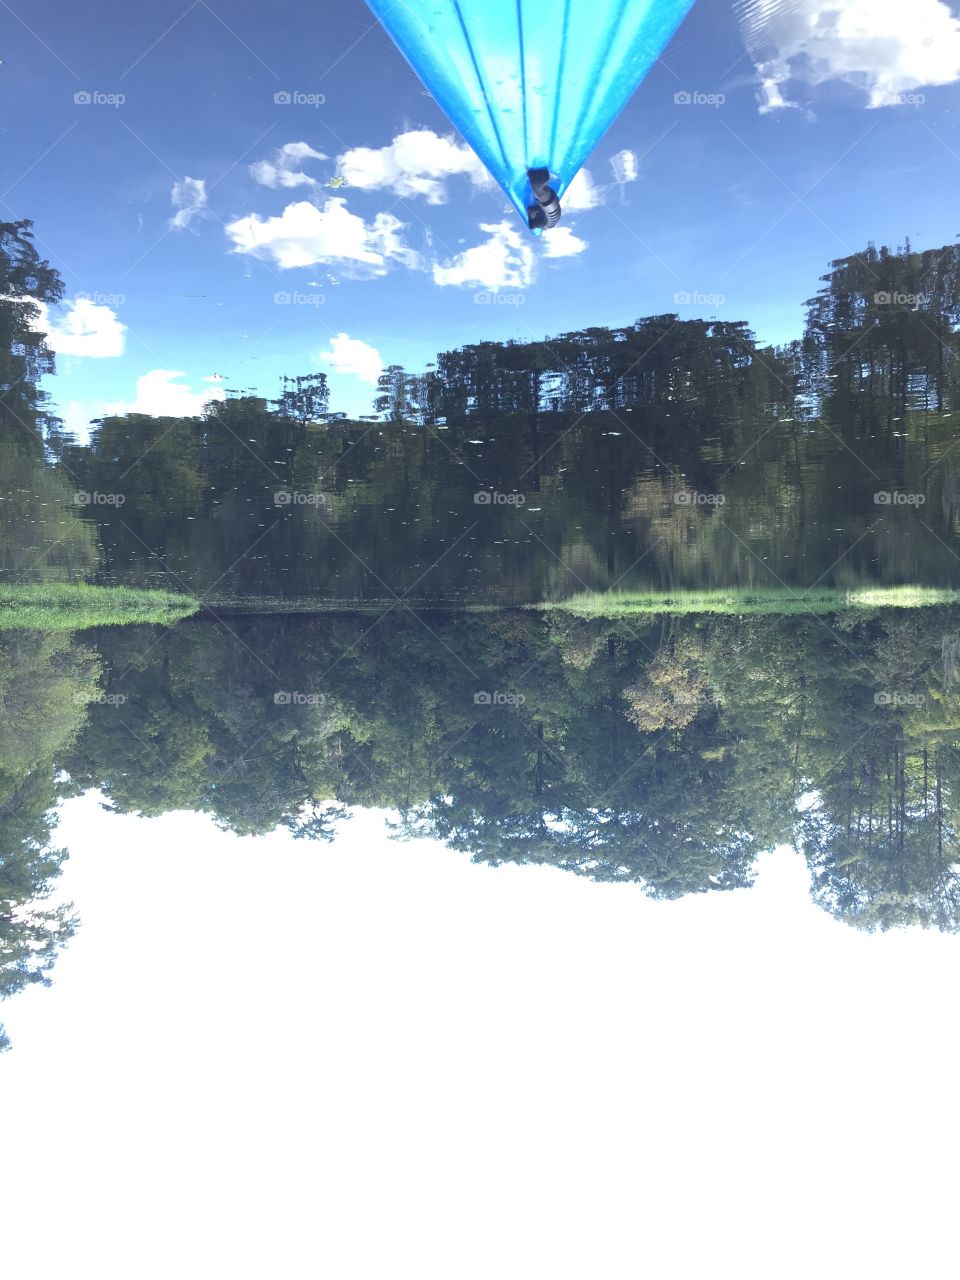 Upside down reflection #no clouds